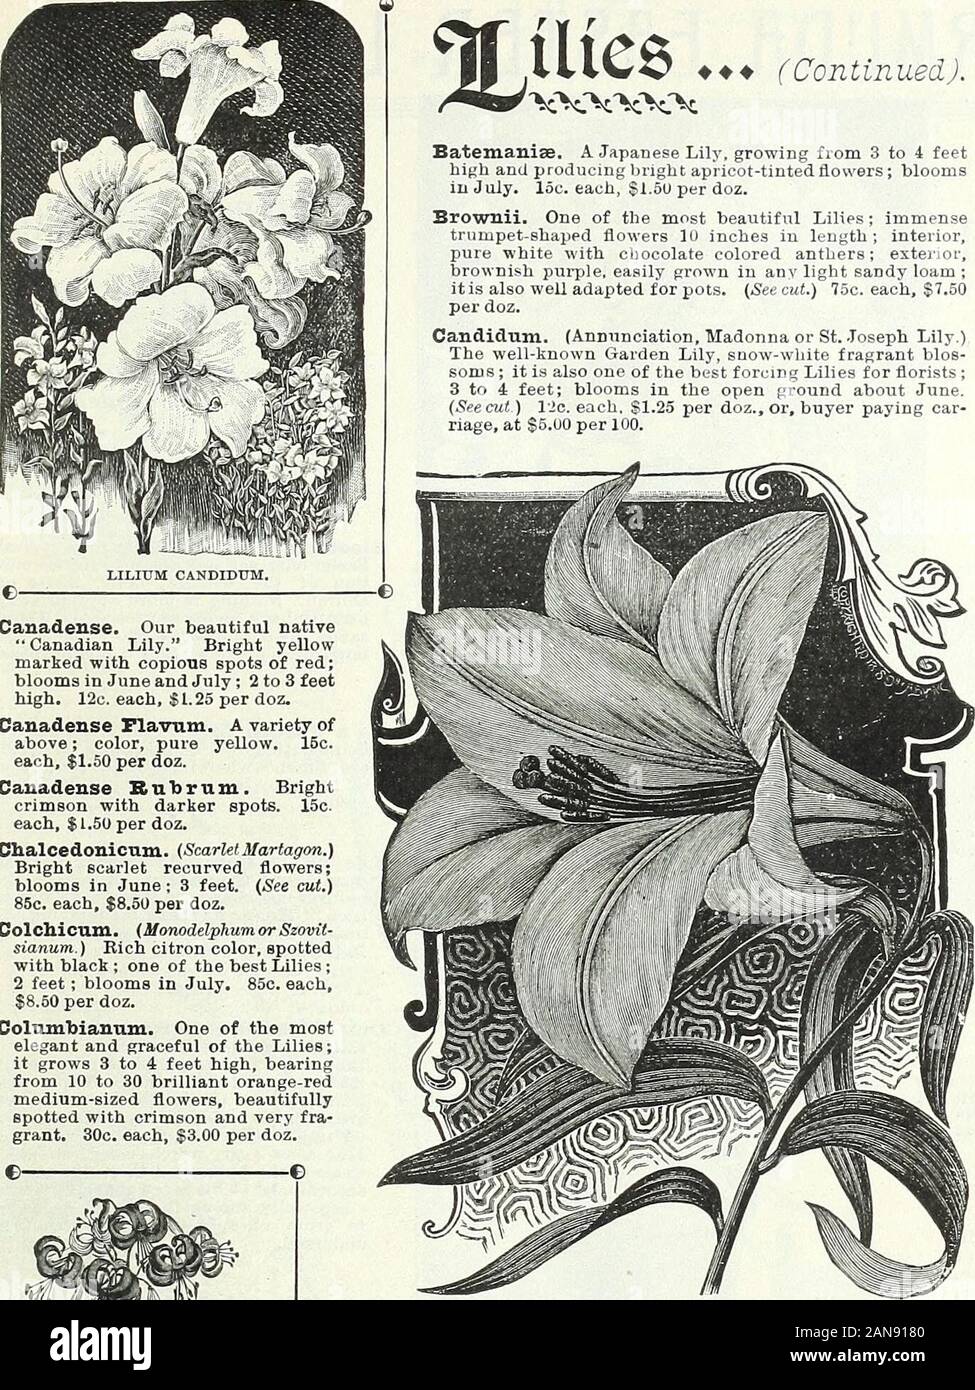 Bulbs, plants, and seeds for autumn planting : 1897 . e white, with a bandthrough each petal, onehalf of which is red and the other half yellow,entire flower beautifully spotted crimson. 60c. each, $6.00 per doz. Auratum Witteii. A magnificent Lily, immense flowers, widelyexpanded, color purest white with a wide yellow stripe through thecentre of each petal, often grows 6 feet high, very free-blooming,frequently bearing from 30 to 40 flowers on a stem. $1.25 each,$12.00 per doz. Auratum Platyphyllum. This is without a question one of themost wonderful Lilies in cultivation. The leaves are very Stock Photo